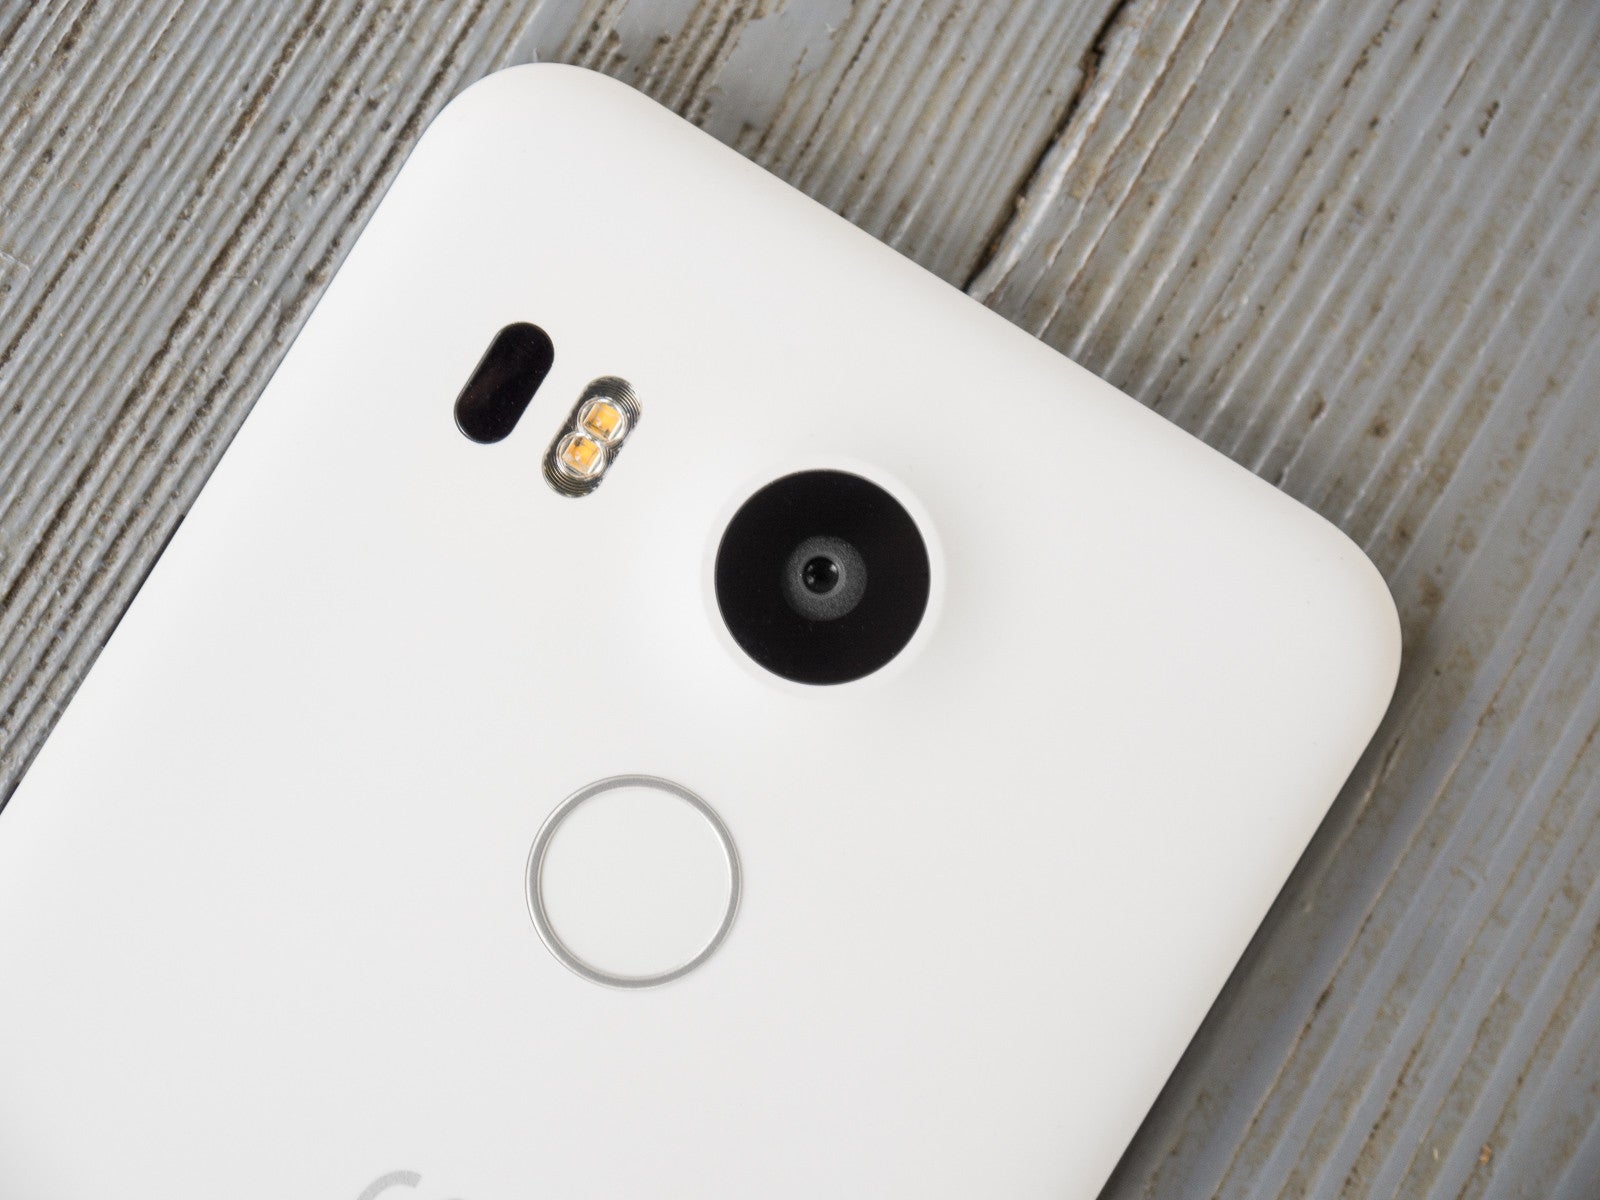 You can get a new Nexus 5X for $240 from eBay right now and we're not even joking